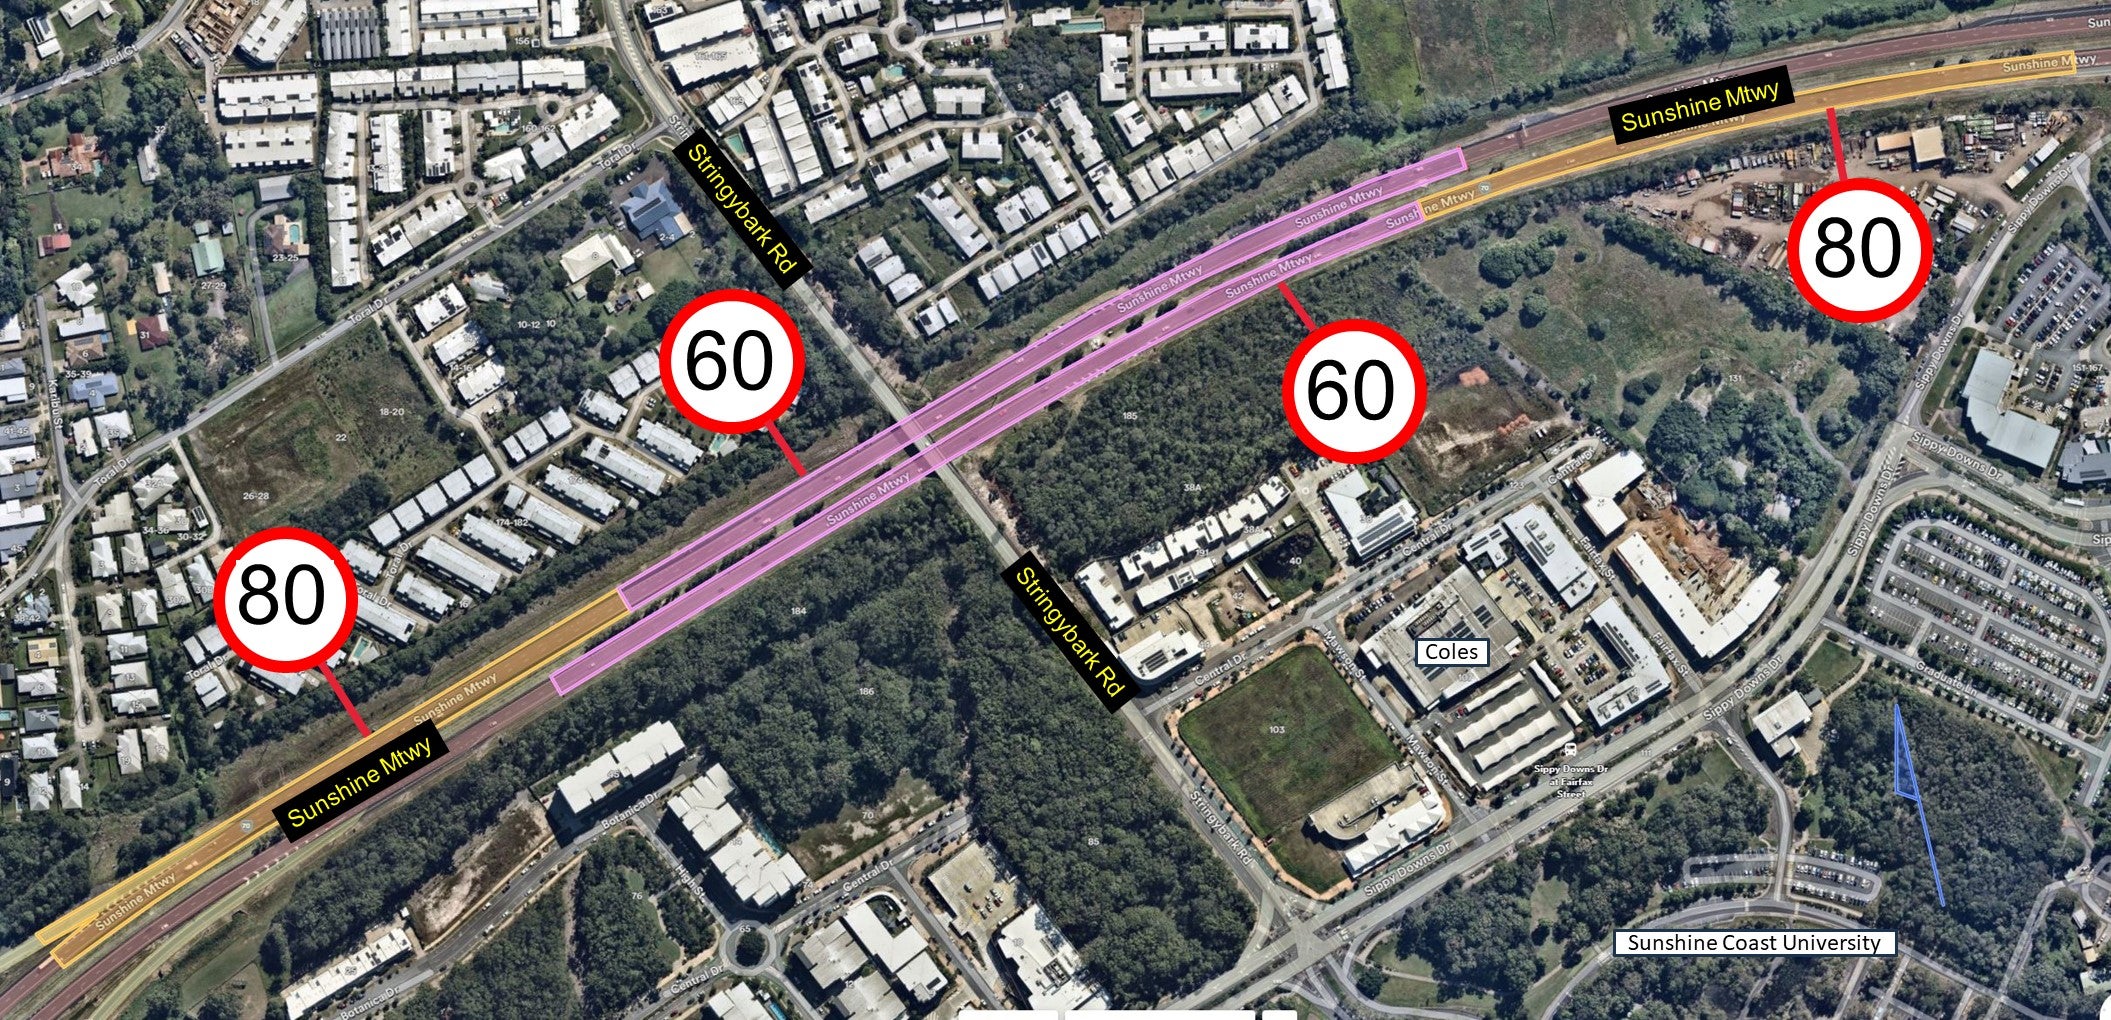 Indicative locations of temporary reduced speed zones with speed cameras in place. 